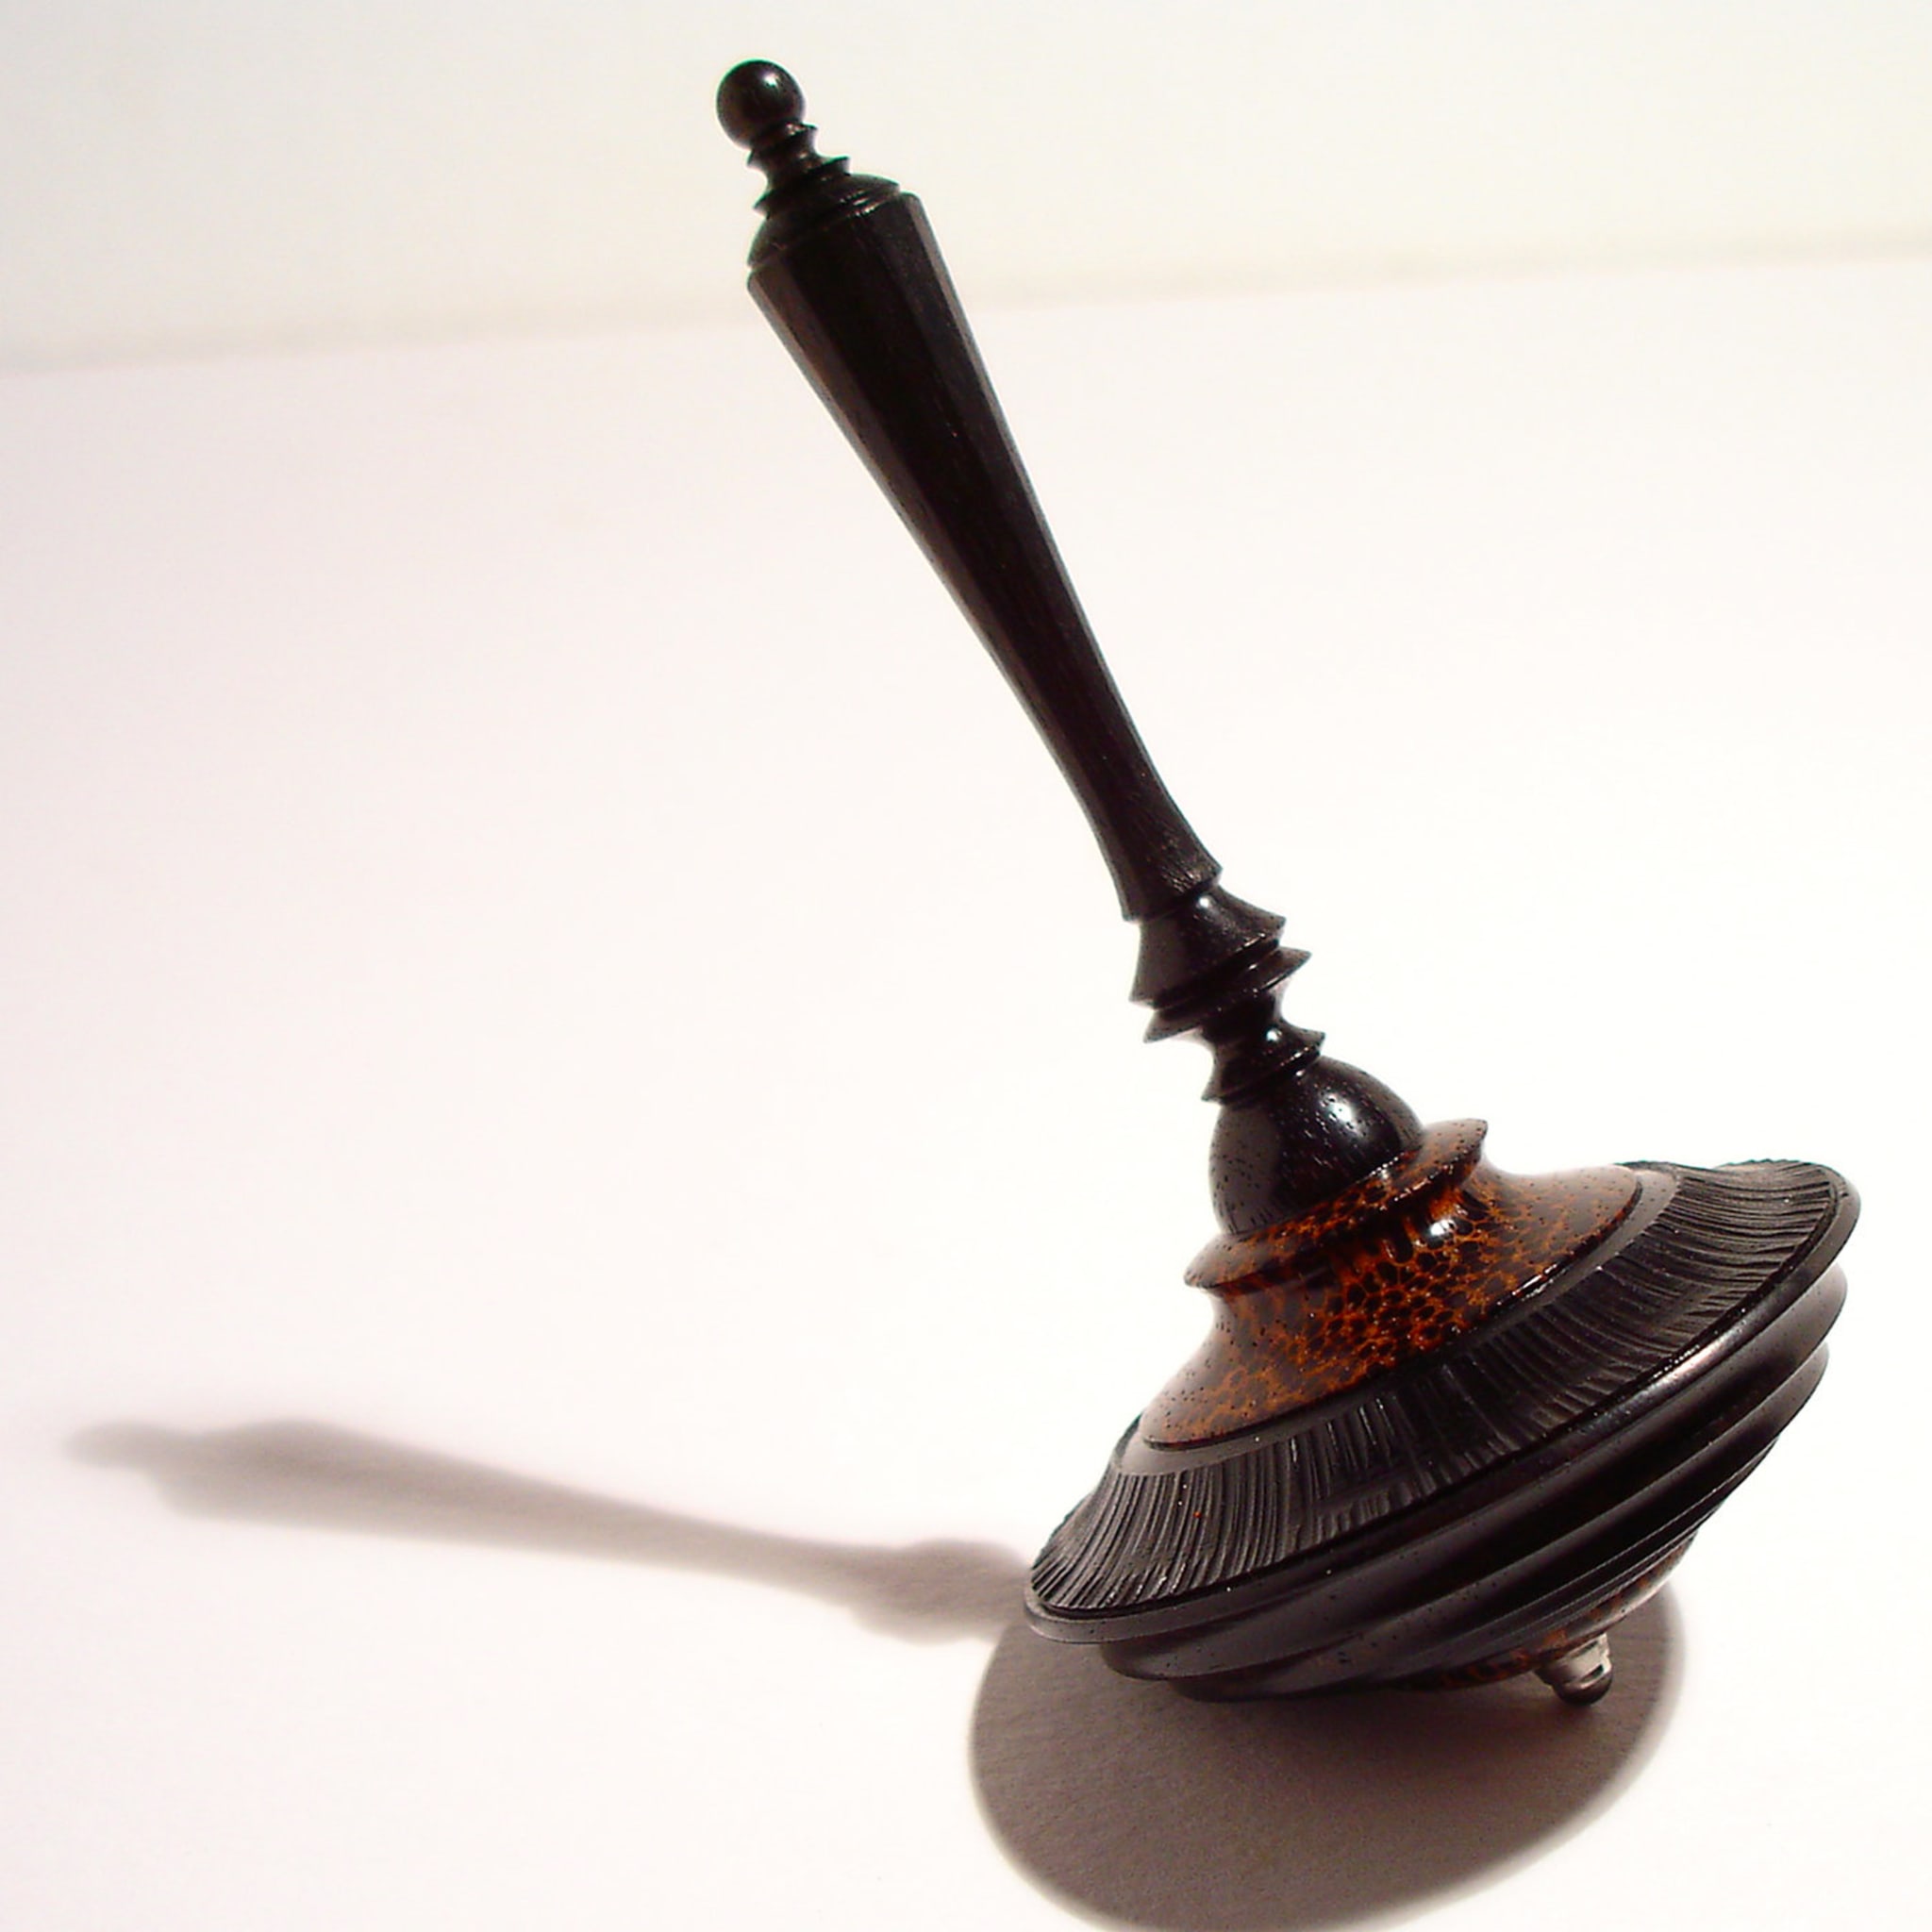 DarkStyle Spinning Top in Ebony and Black Palm - Alternative view 1